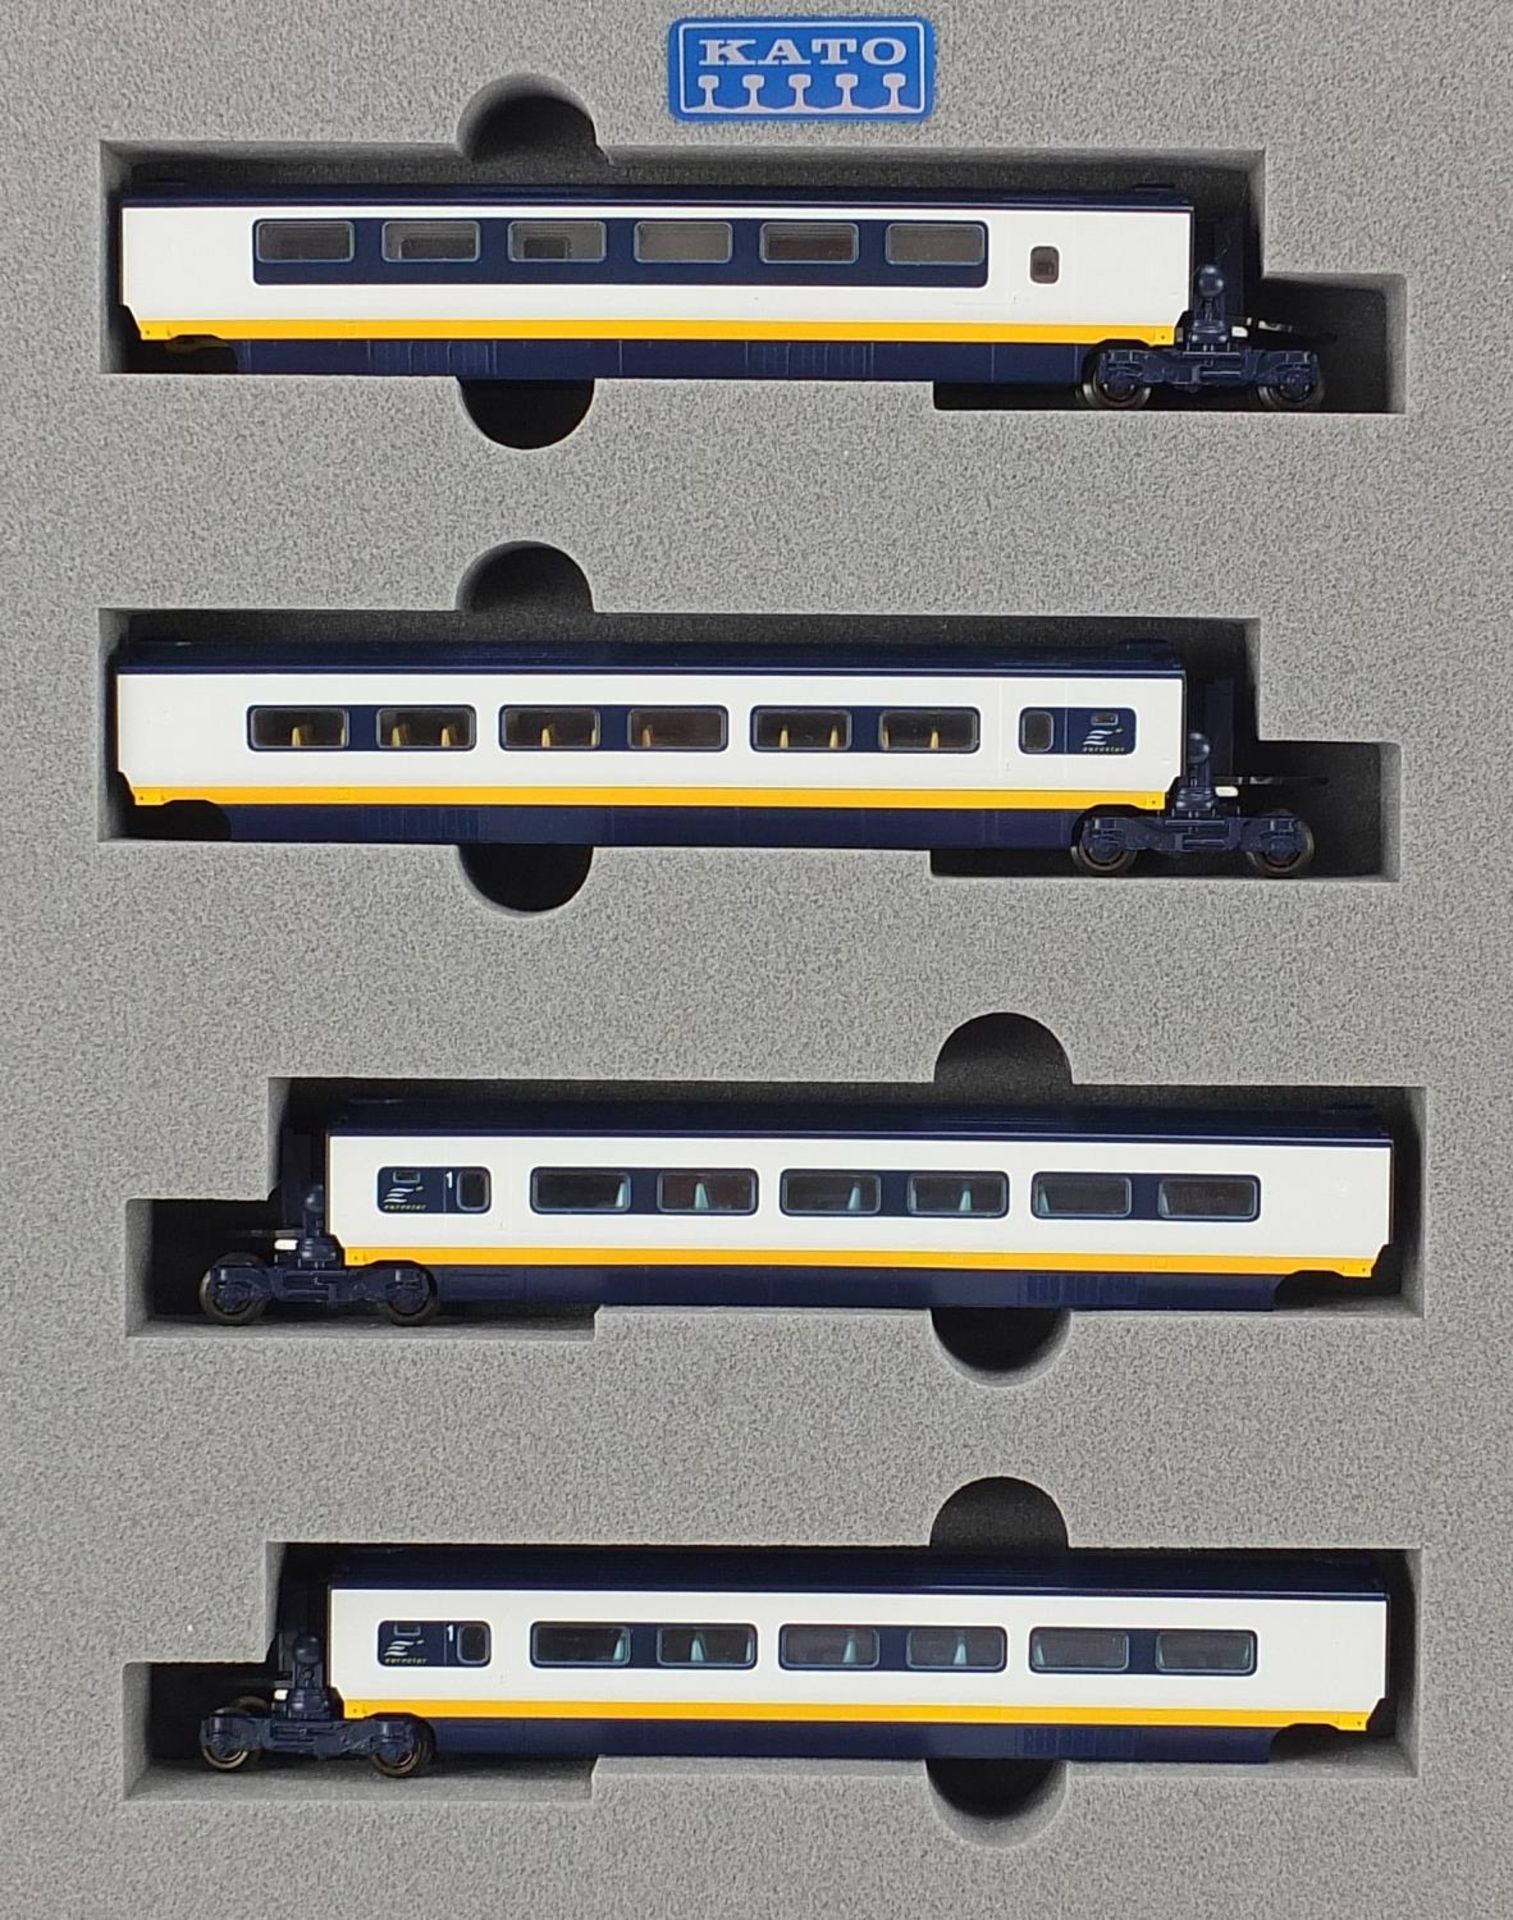 Two Kato N gauge model railway Eurostar four car sets with boxes, numbers 10-328 - Image 2 of 6